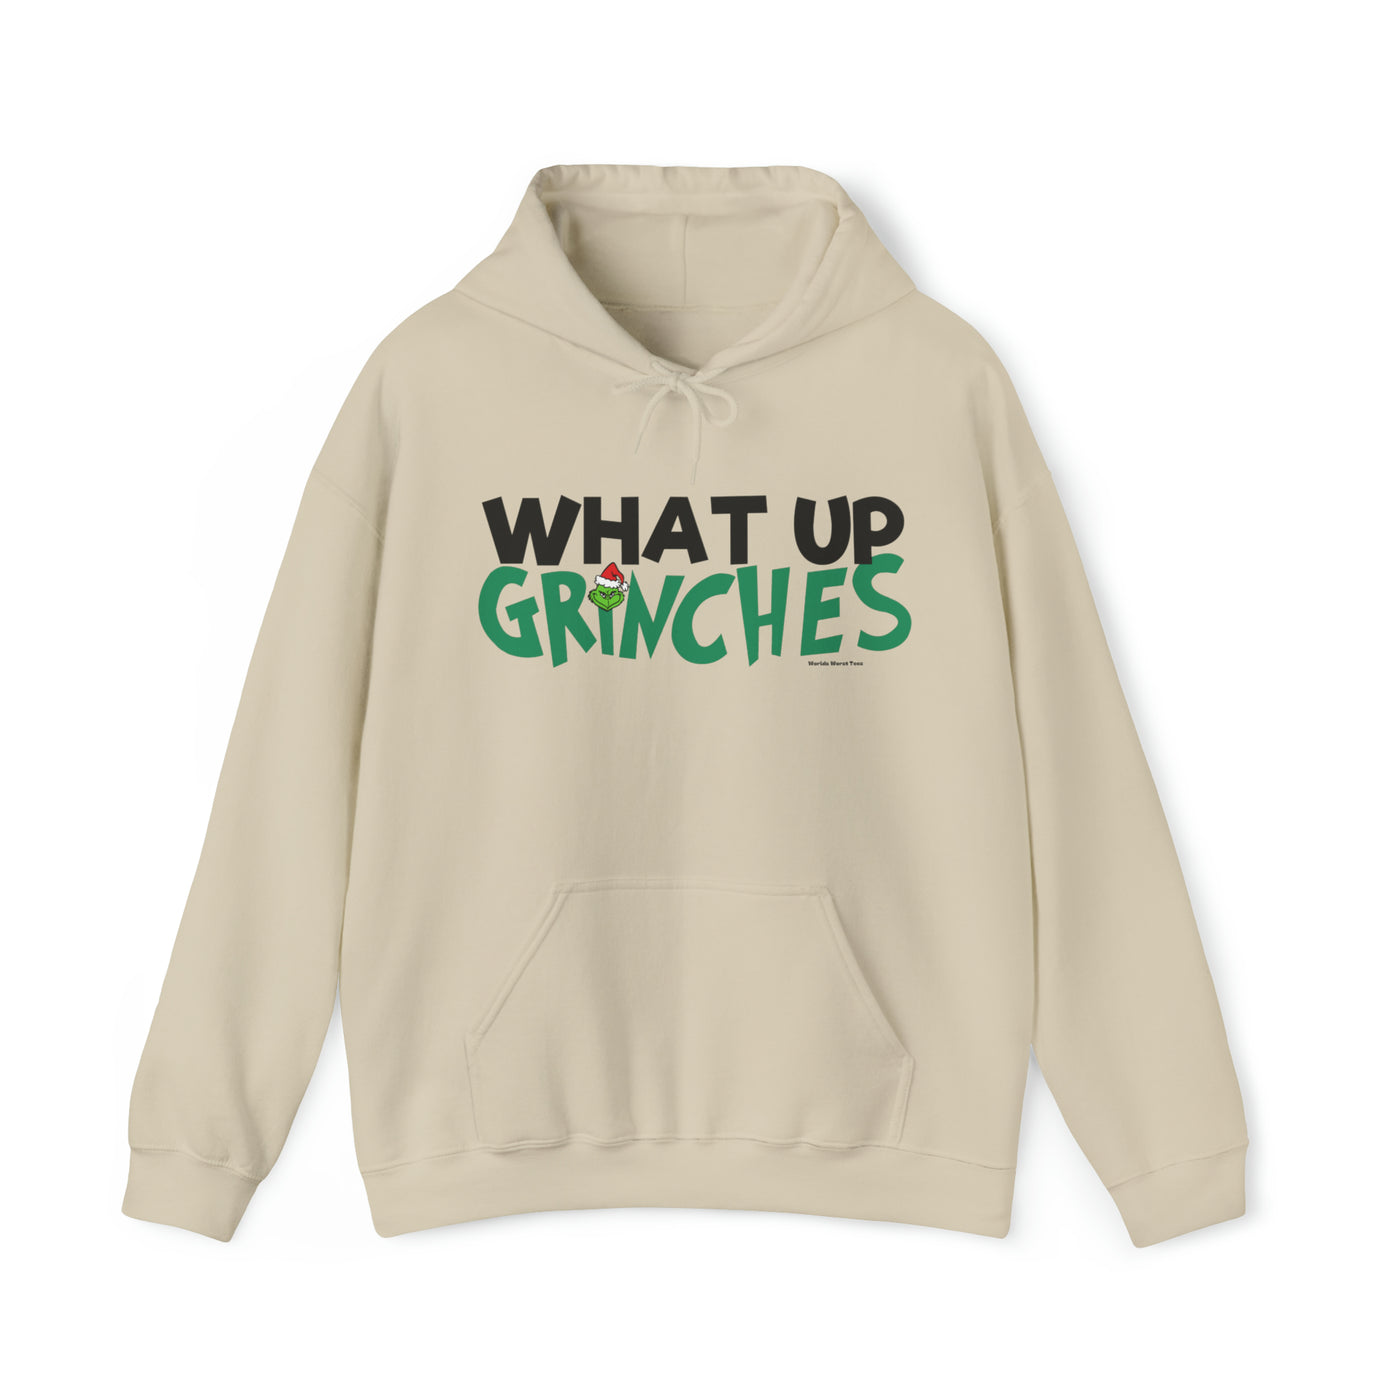 What up Grinches Hoodie